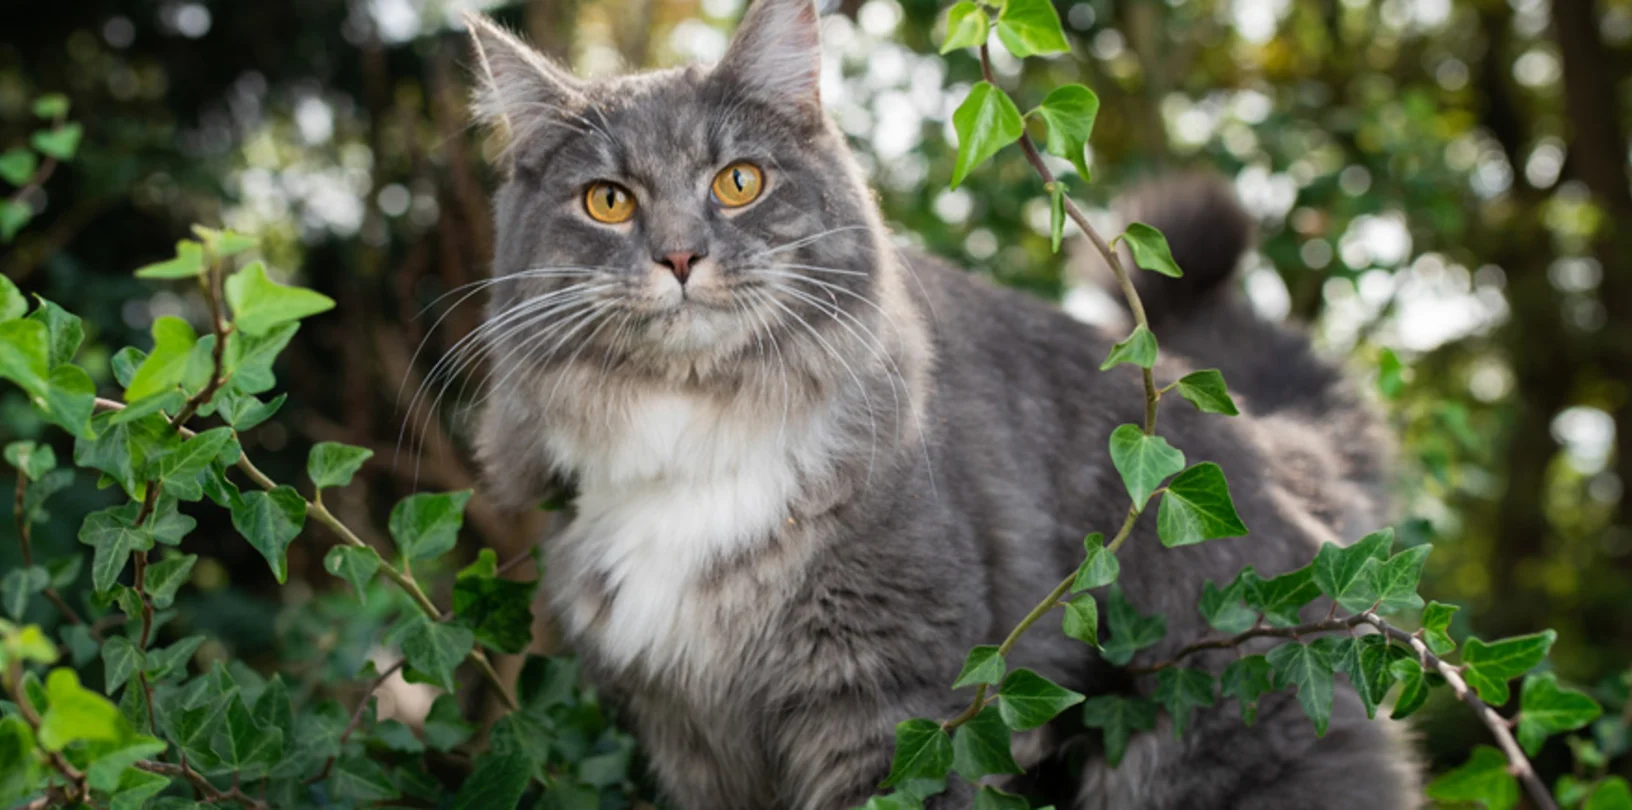 Gray Cat Outdoors in the Woods